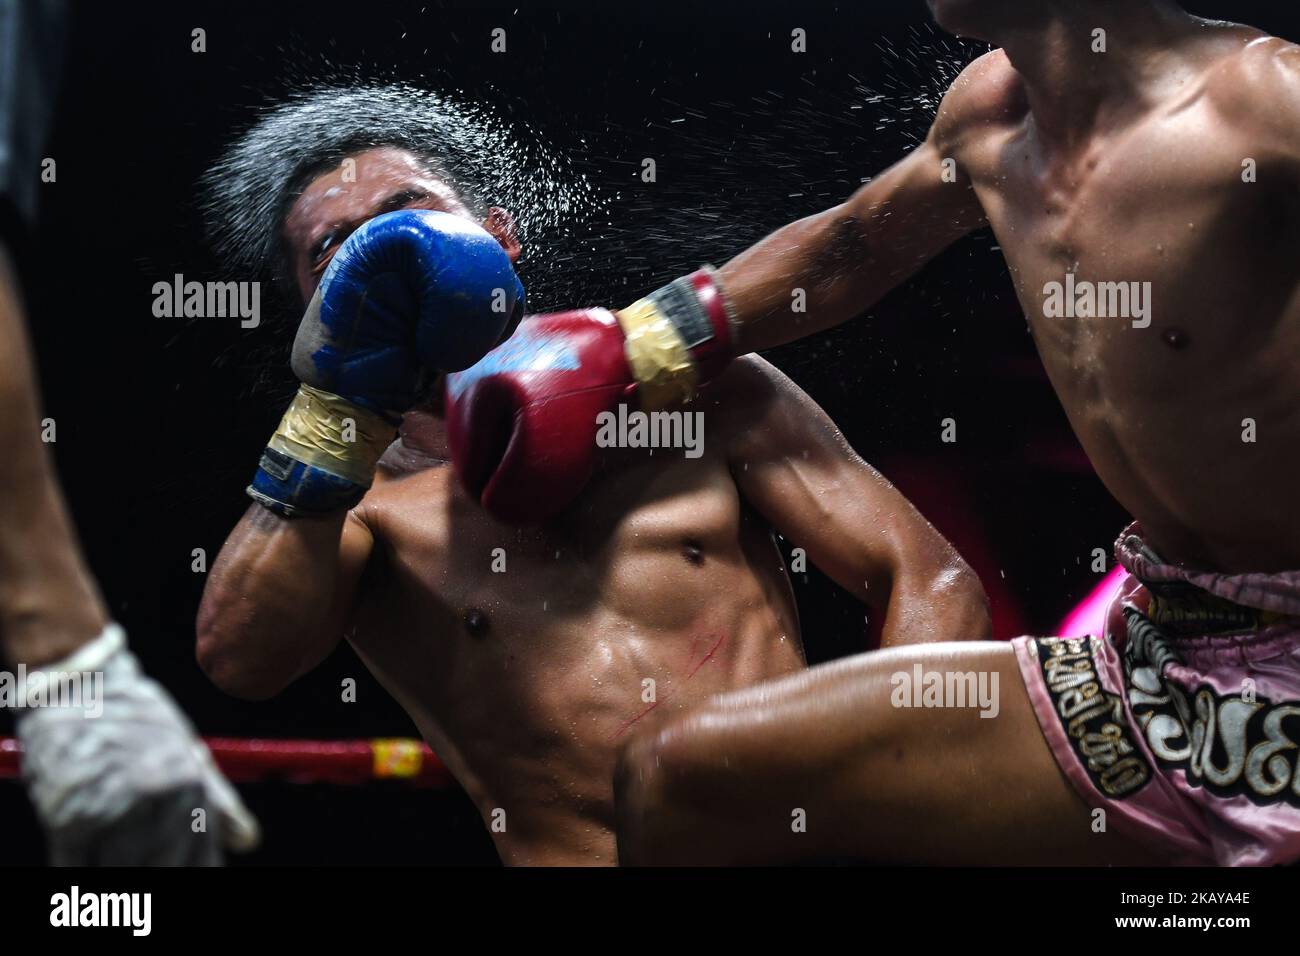 Plerngarom (Red) punches Pongsin (Blue), a Thai boxing combat in 54kg category, during Muaythai Monday Evening International Thai Boxing Gala in Thaphae Stadium in Chiang Mai. On Monday, June 11, 2018, Chiang Mai, Chiang Mai Province, Thailand. (Photo by Artur Widak/NurPhoto)  Stock Photo